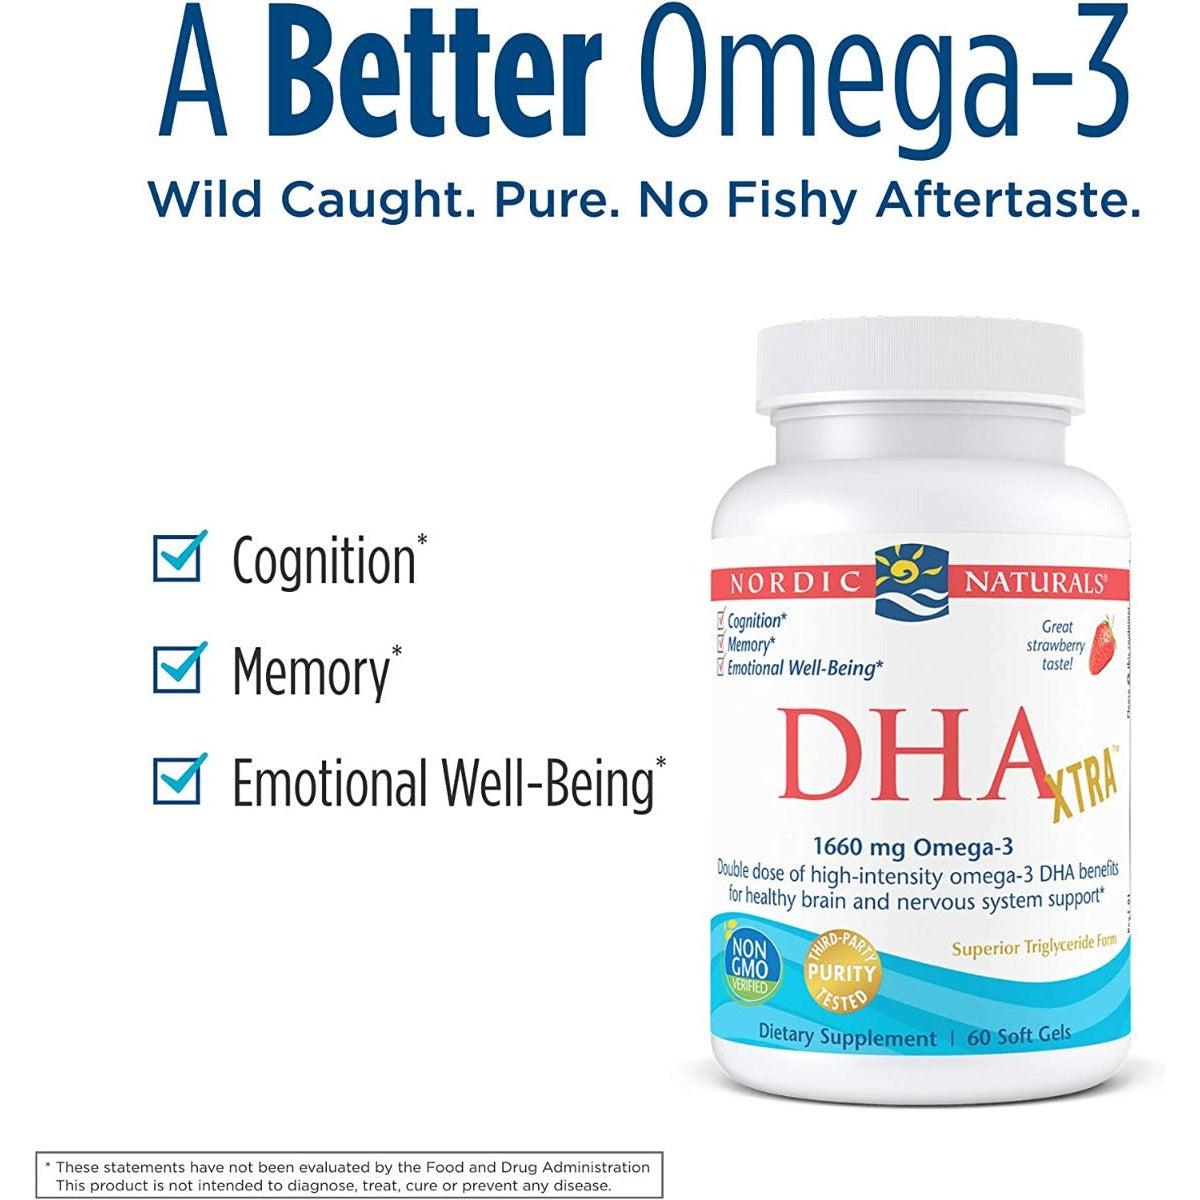 Nordic Naturals DHA Xtra Strawberry 1660 mg Omega-3 High-Intensity DHA Formula for Brain & Nervous 60 Softgels